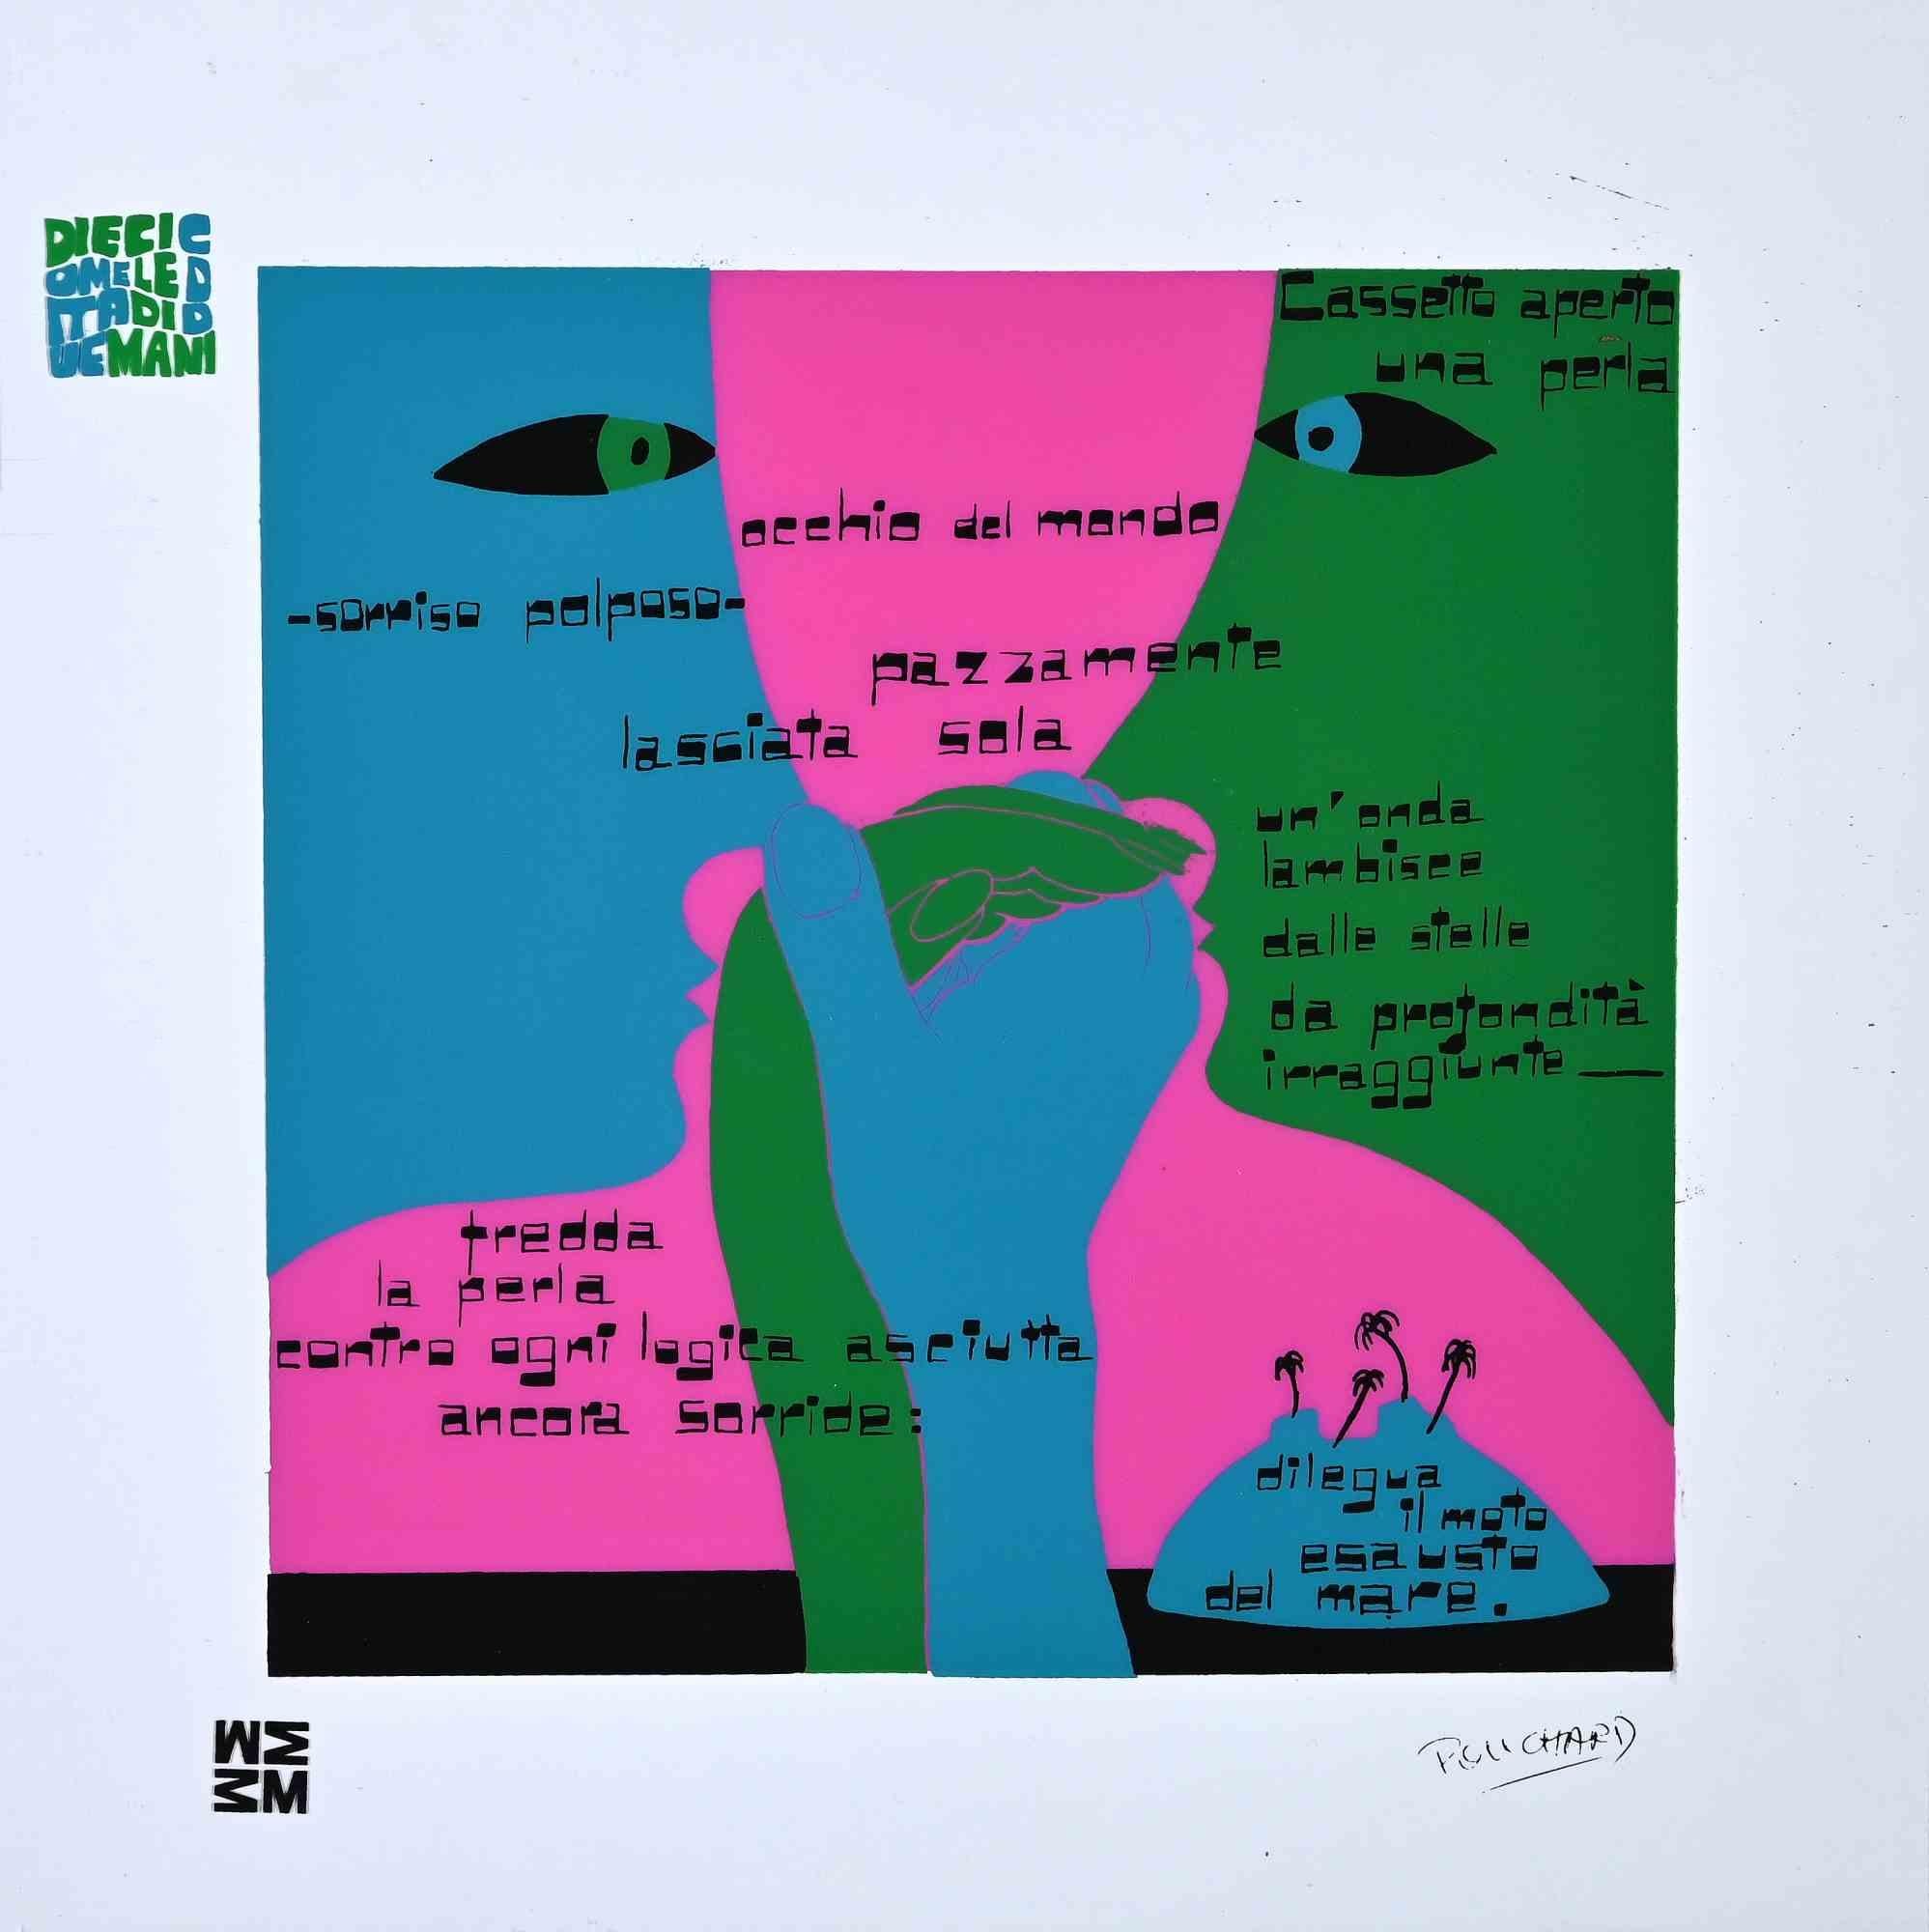 Una Perla is a color silk-screen print on acetates, realized in  1973 by the artist Ennio Pouchard  (1928).

Signed on plate  on the lower right.

From the porfolio " Diecicomeleditadiduemani ", containing 10 silk-screen prints on acetates, with